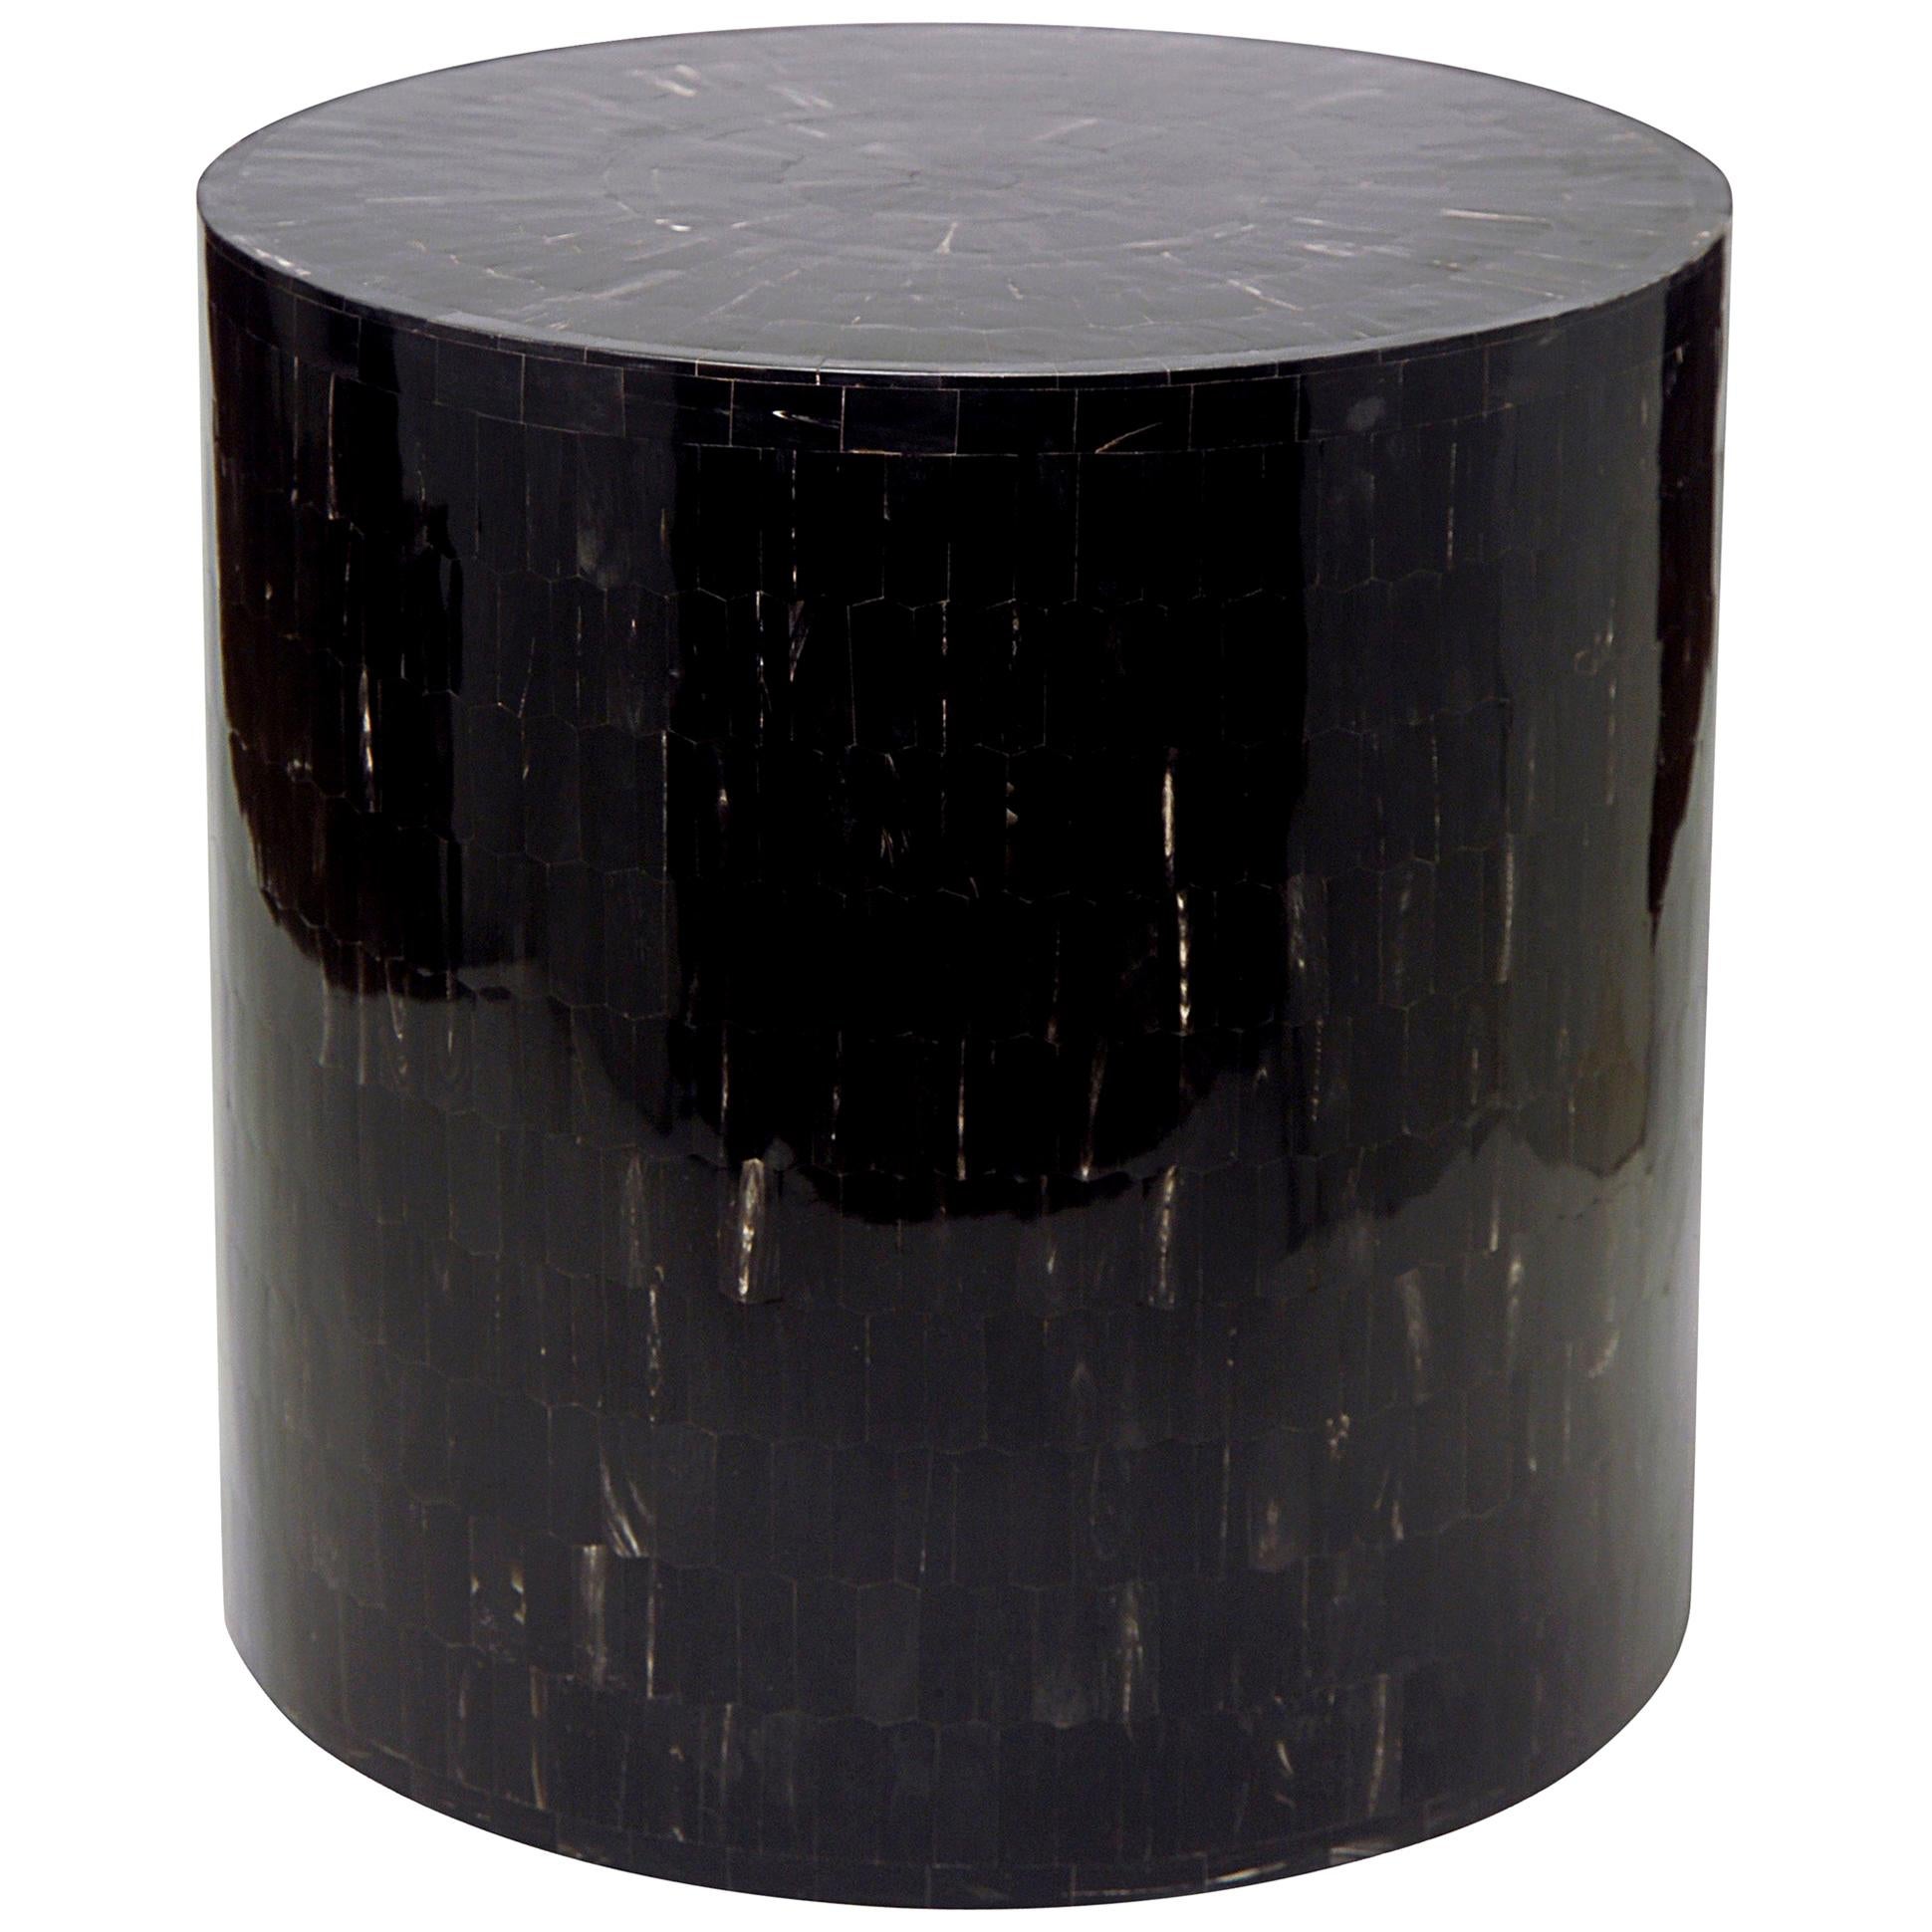 Drum Stool or Table Made with Horn Marquetry, Serenity